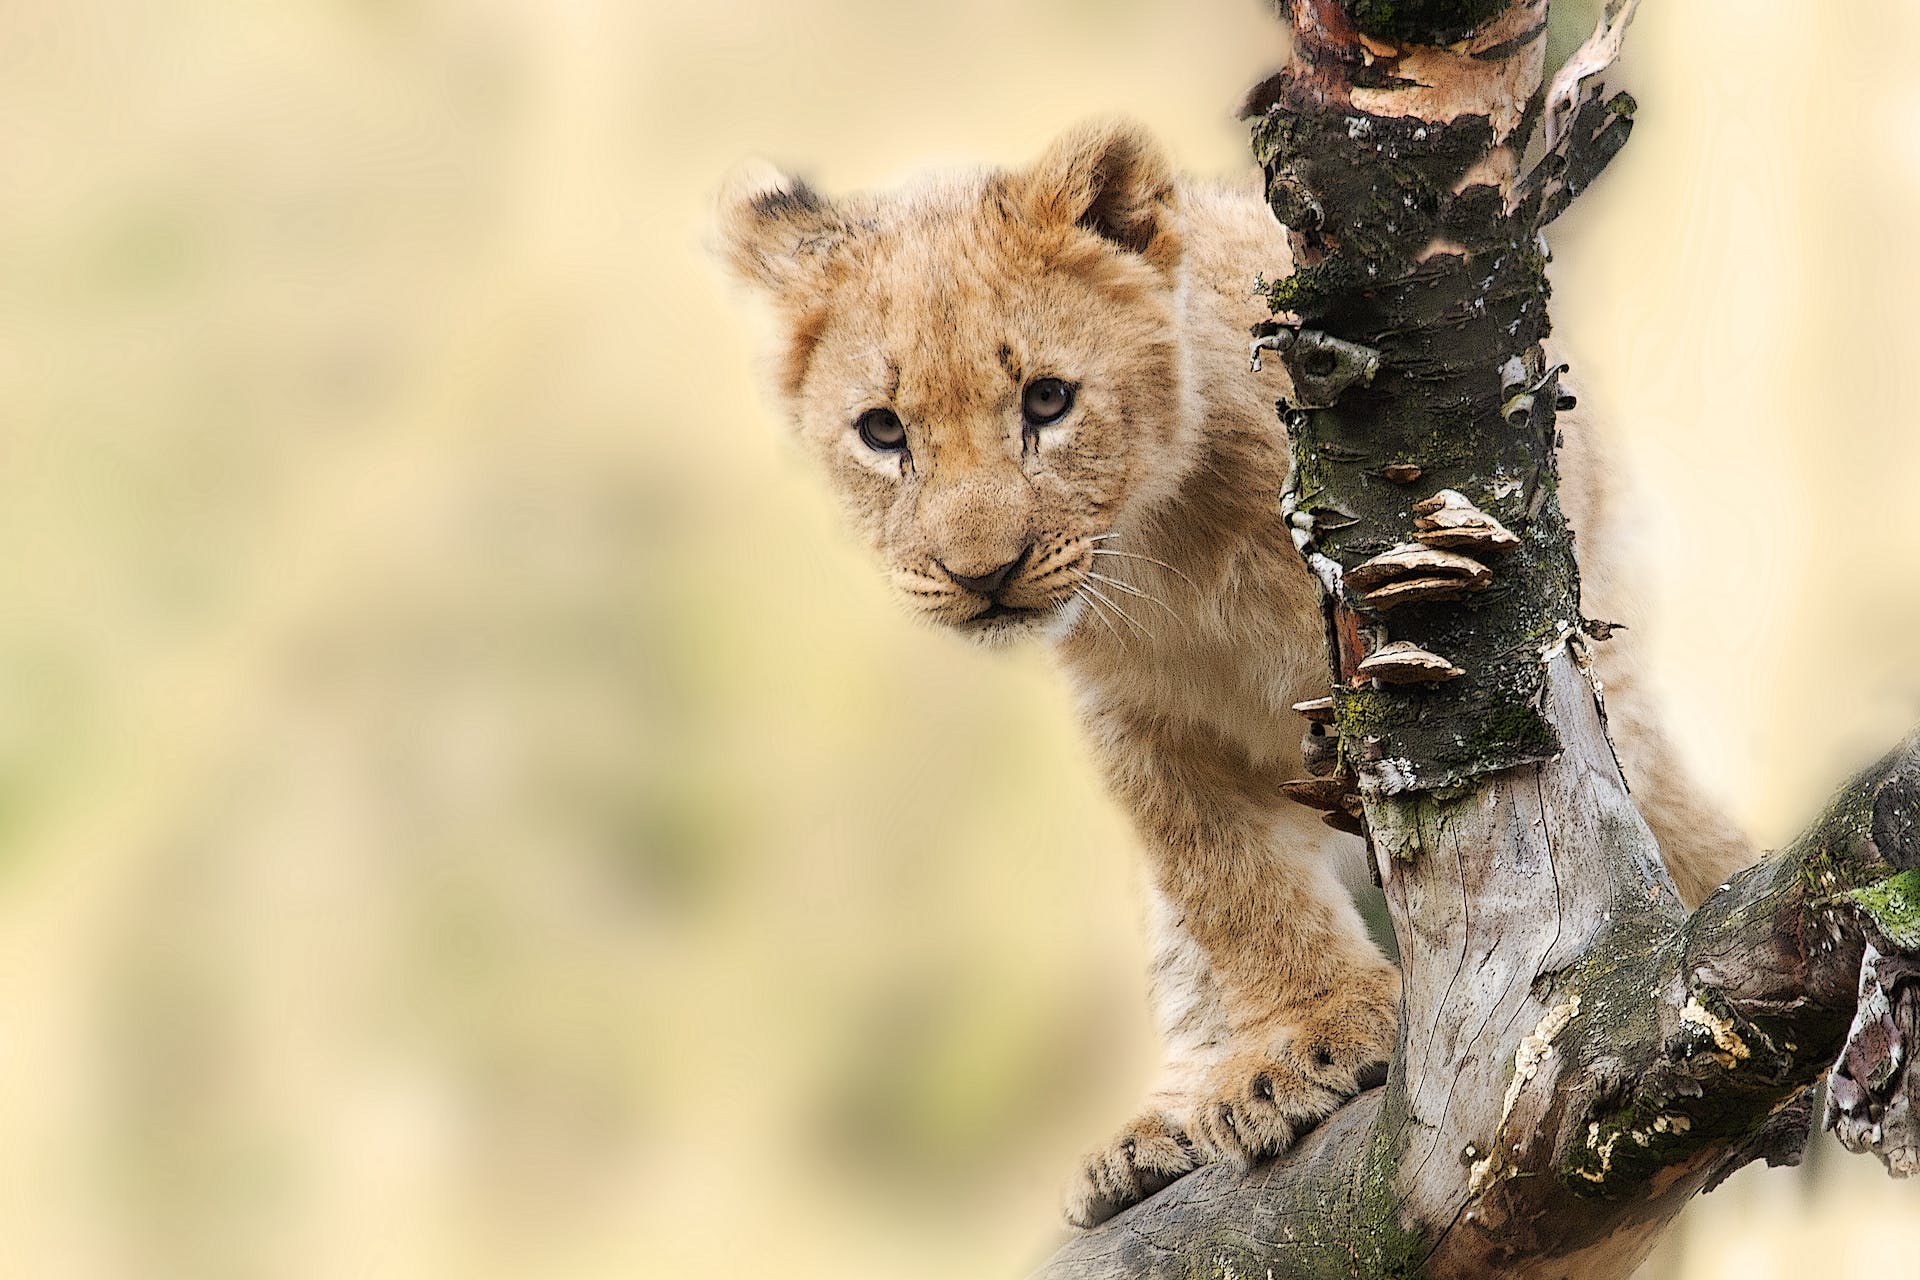 A lion cub sitting on a tree branch in the savannah